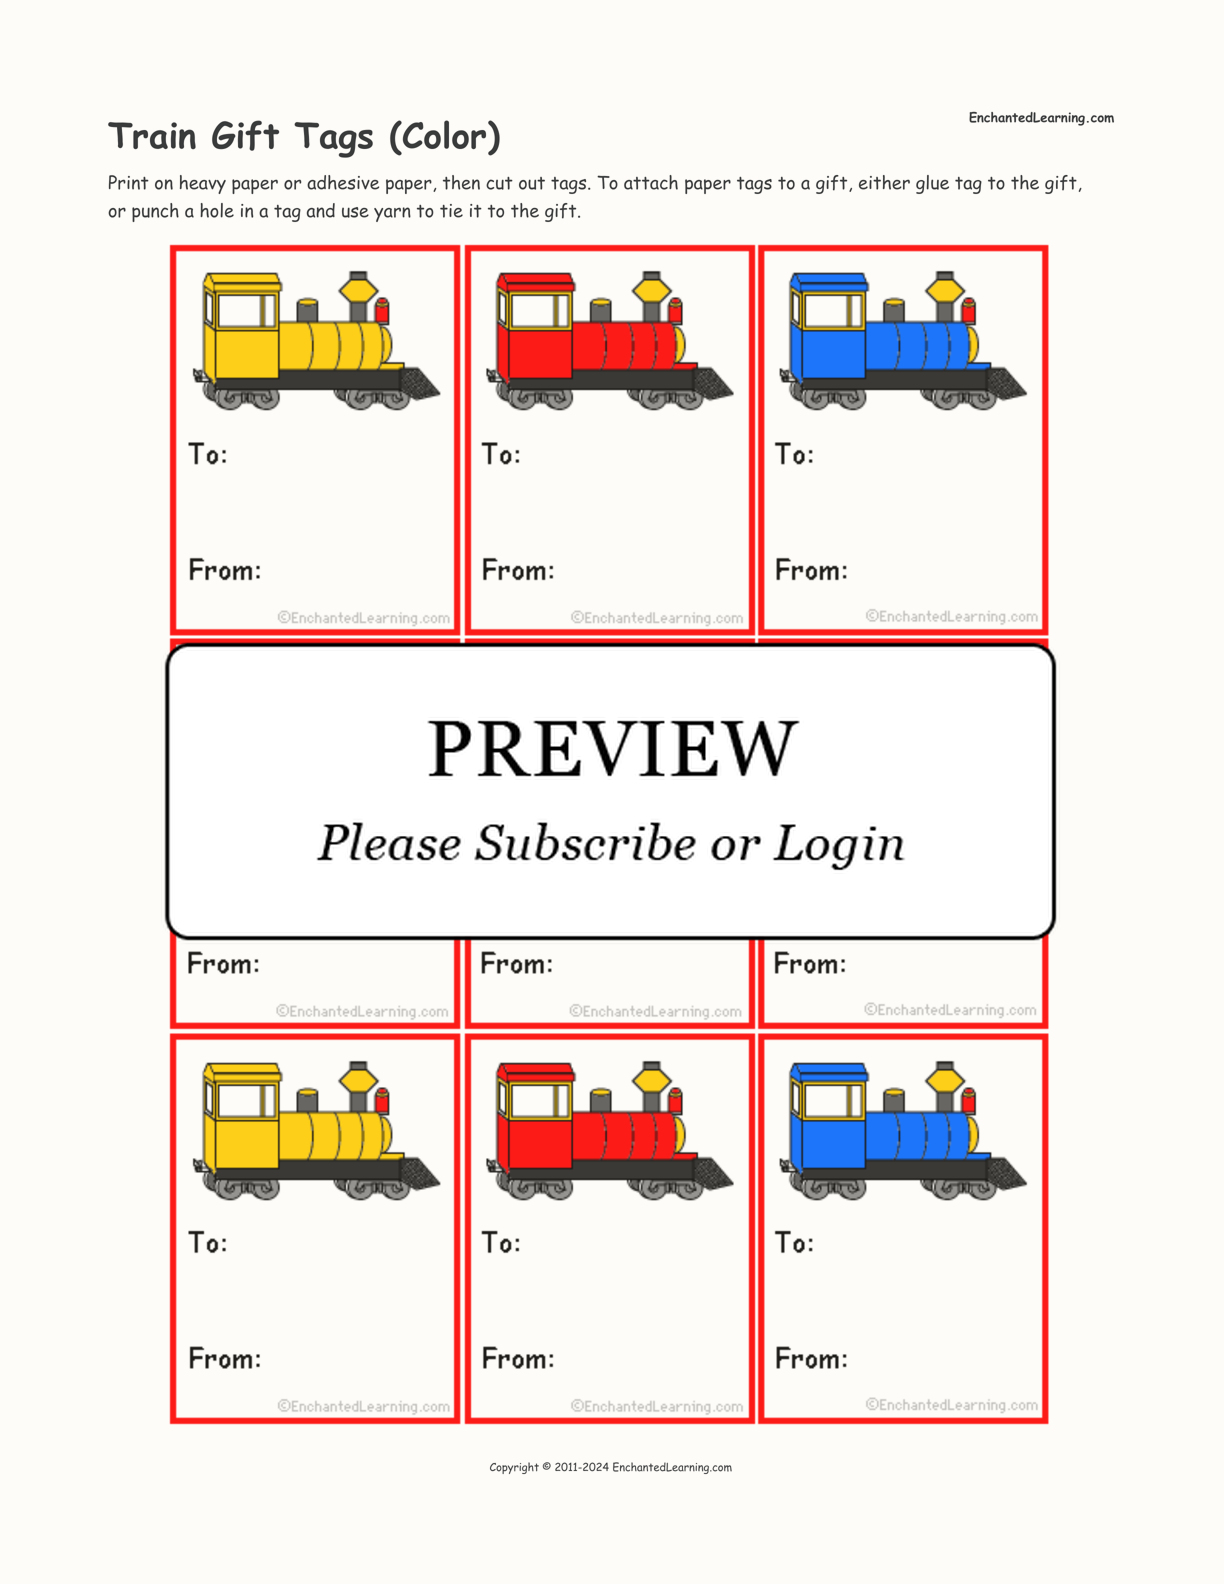 Train Gift Tags (Color) interactive printout page 1